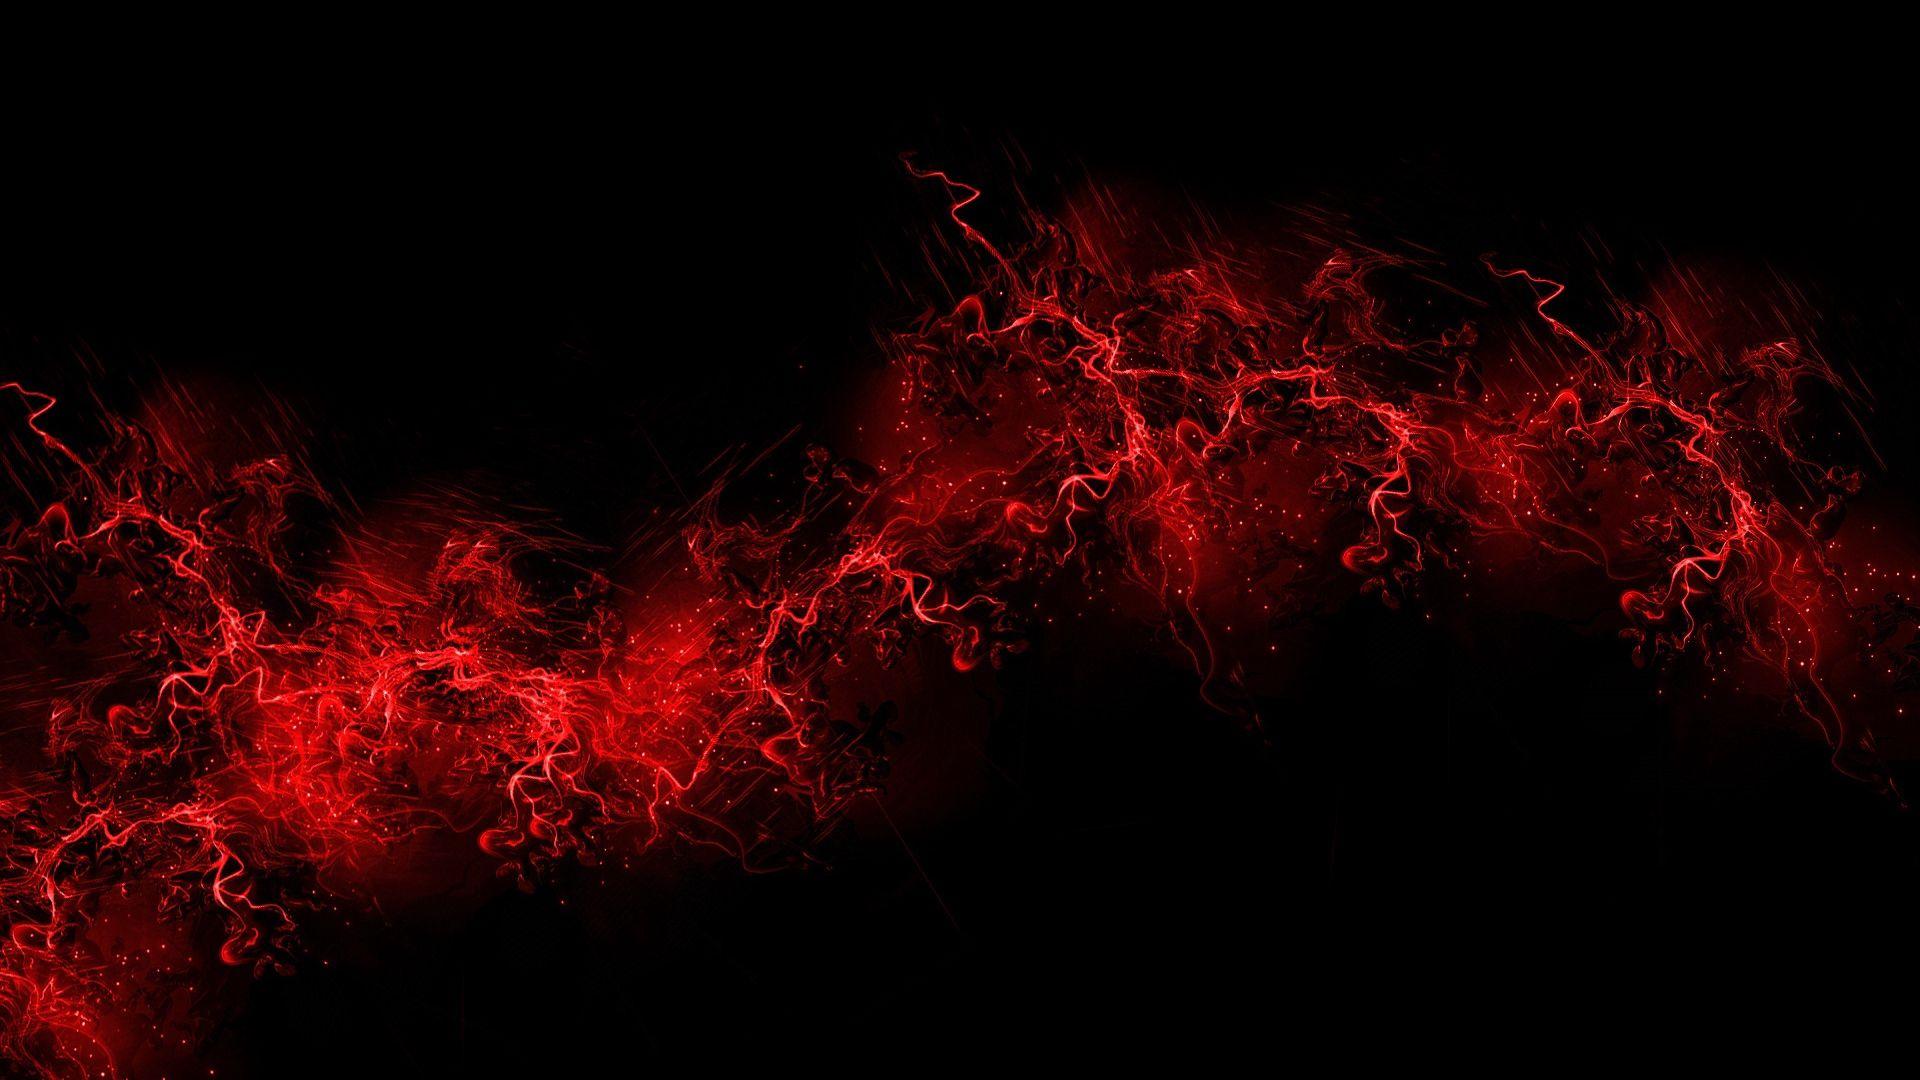 Download wallpaper 1920x1080 black background, red, color, paint, explosion, burst full hd, hdtv, fhd, 1080p HD background